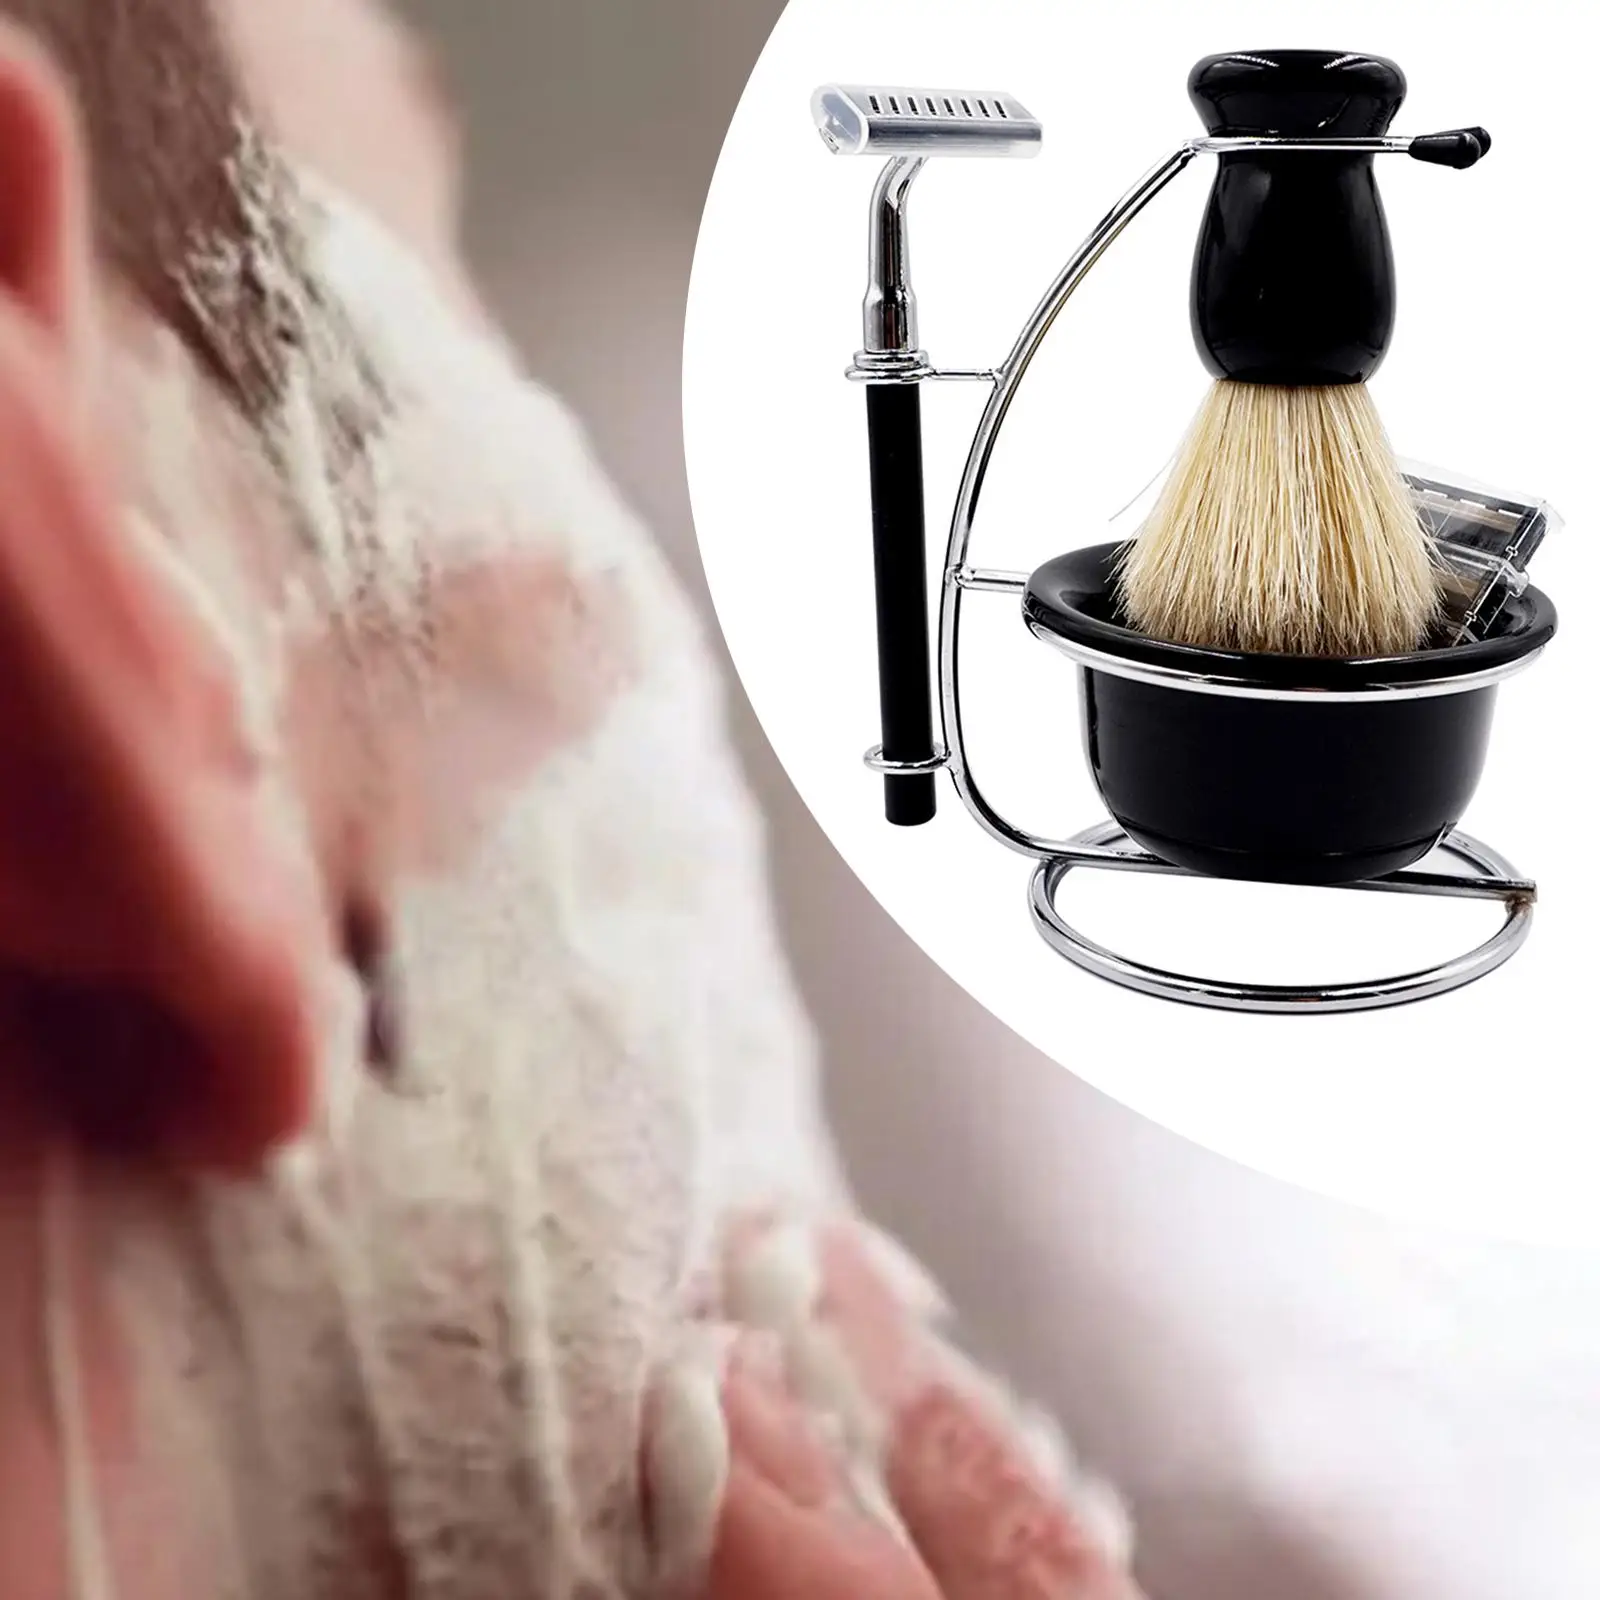 Travel Shaving Kit for Men Manual Stand Brush Bowl Set Portable Accessories Professional Stainess Steel Holder Solid